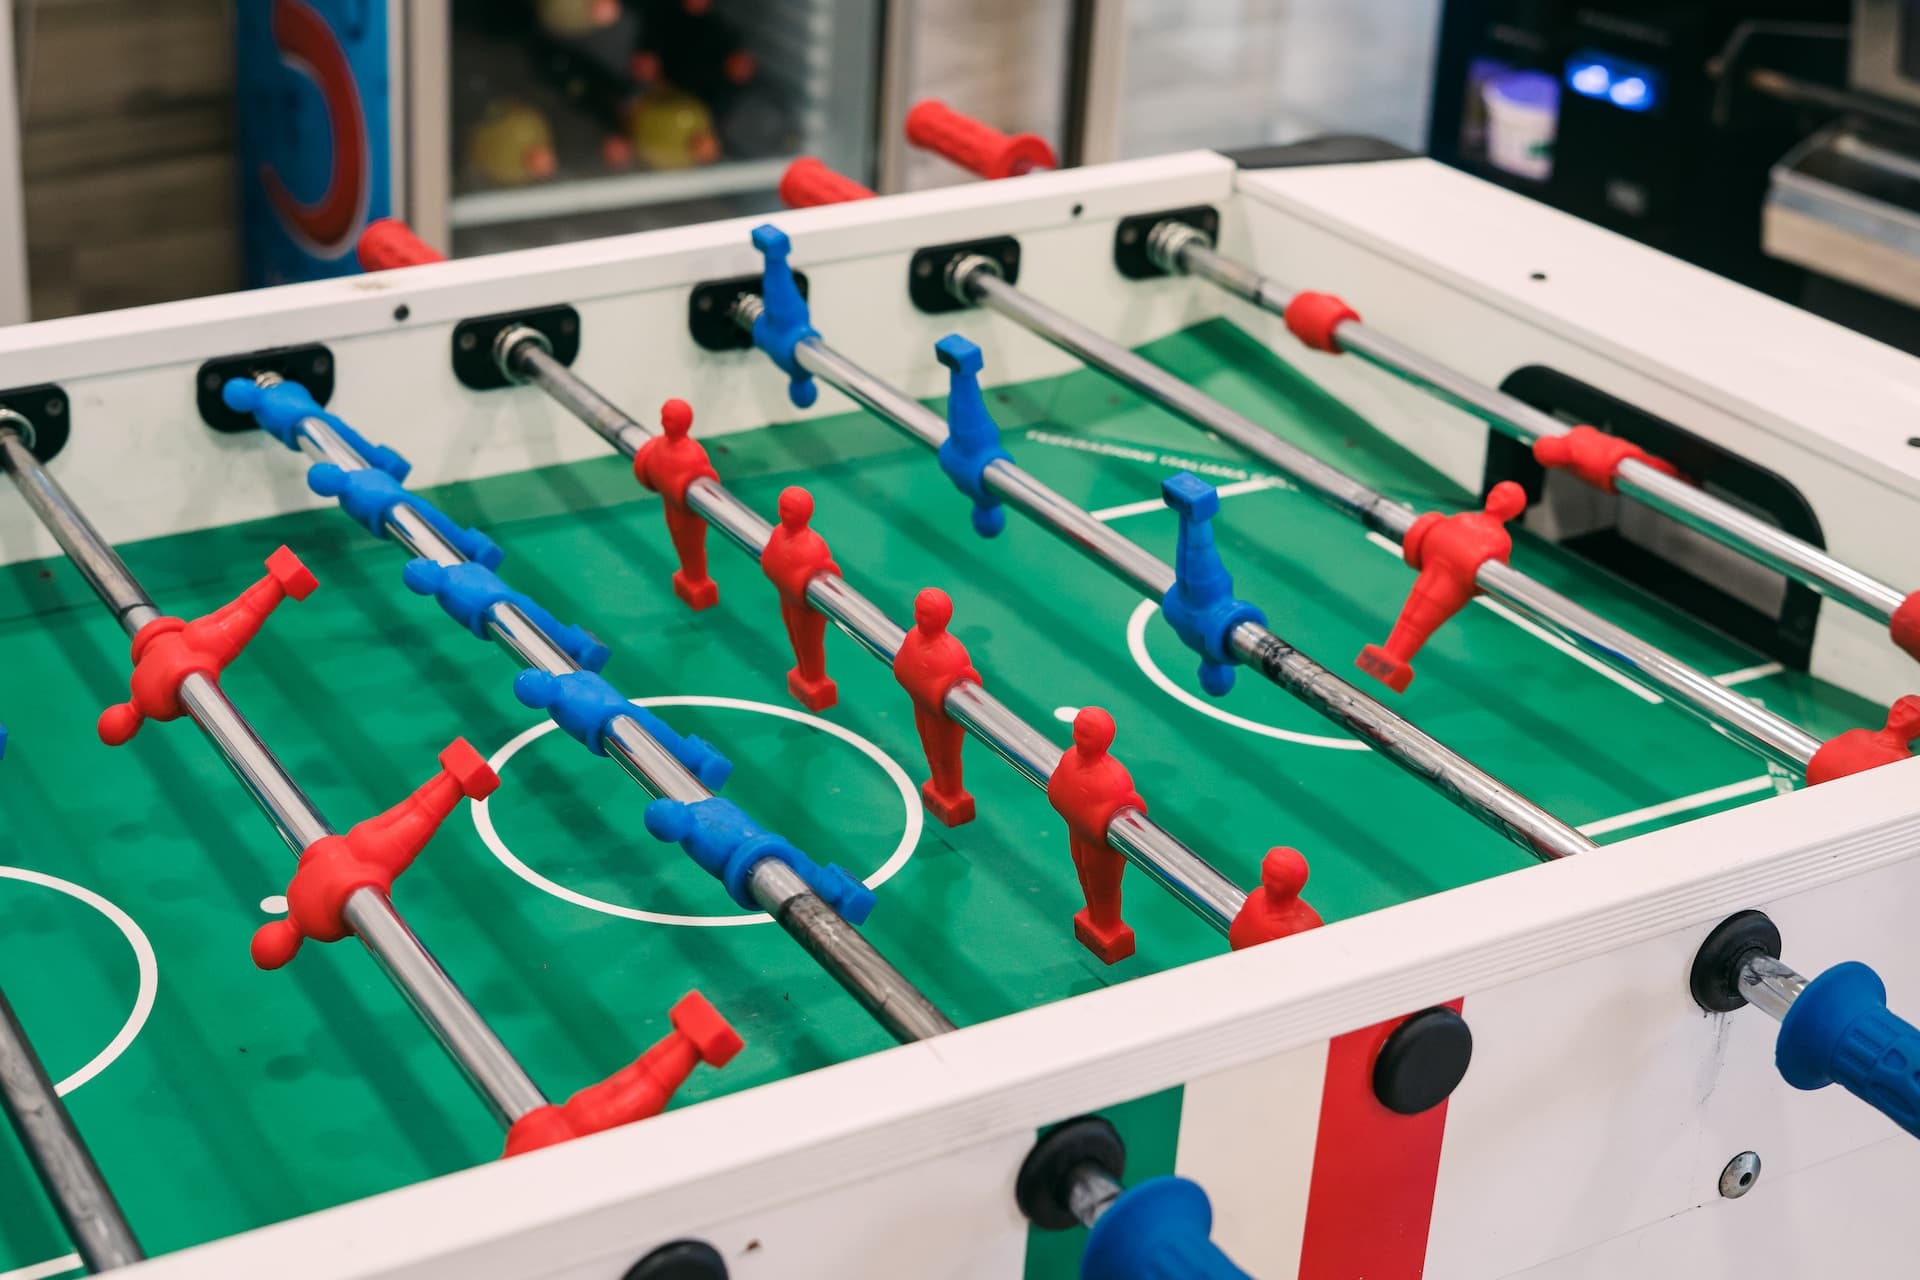 foosball game table ready to play